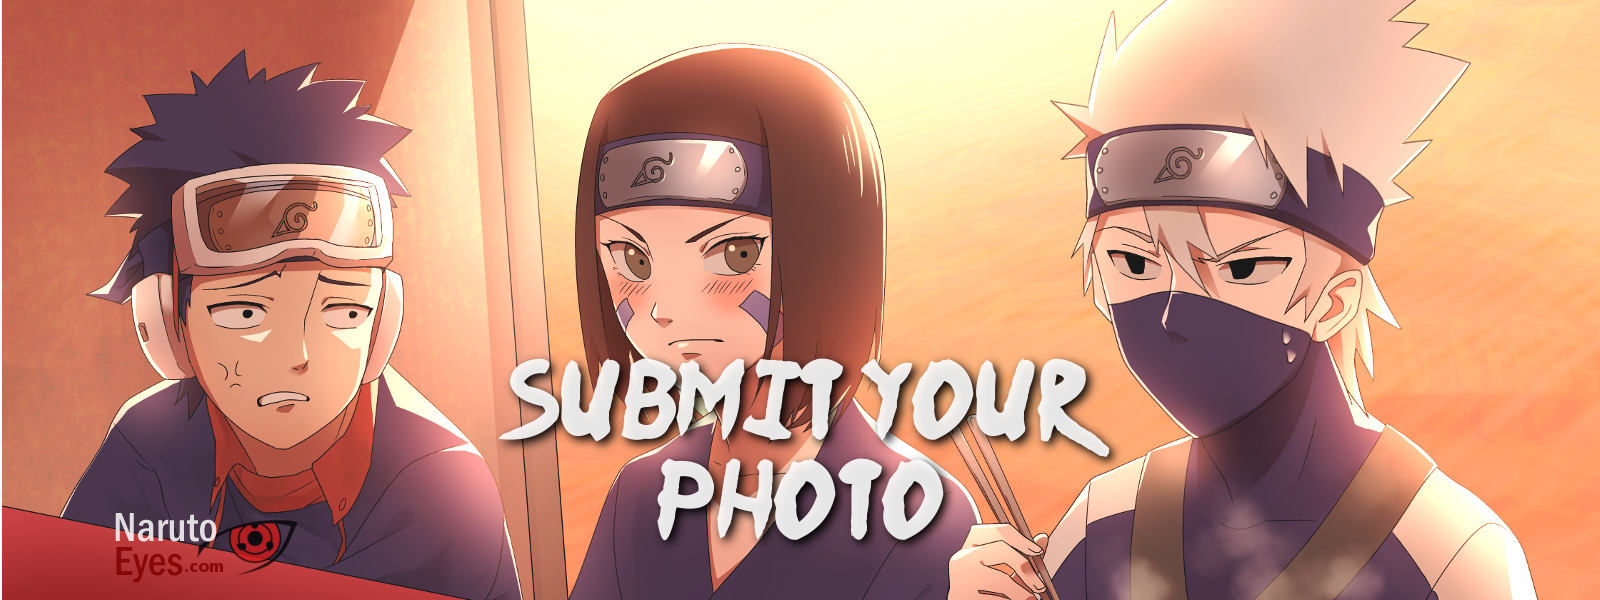 submit your photo banner3